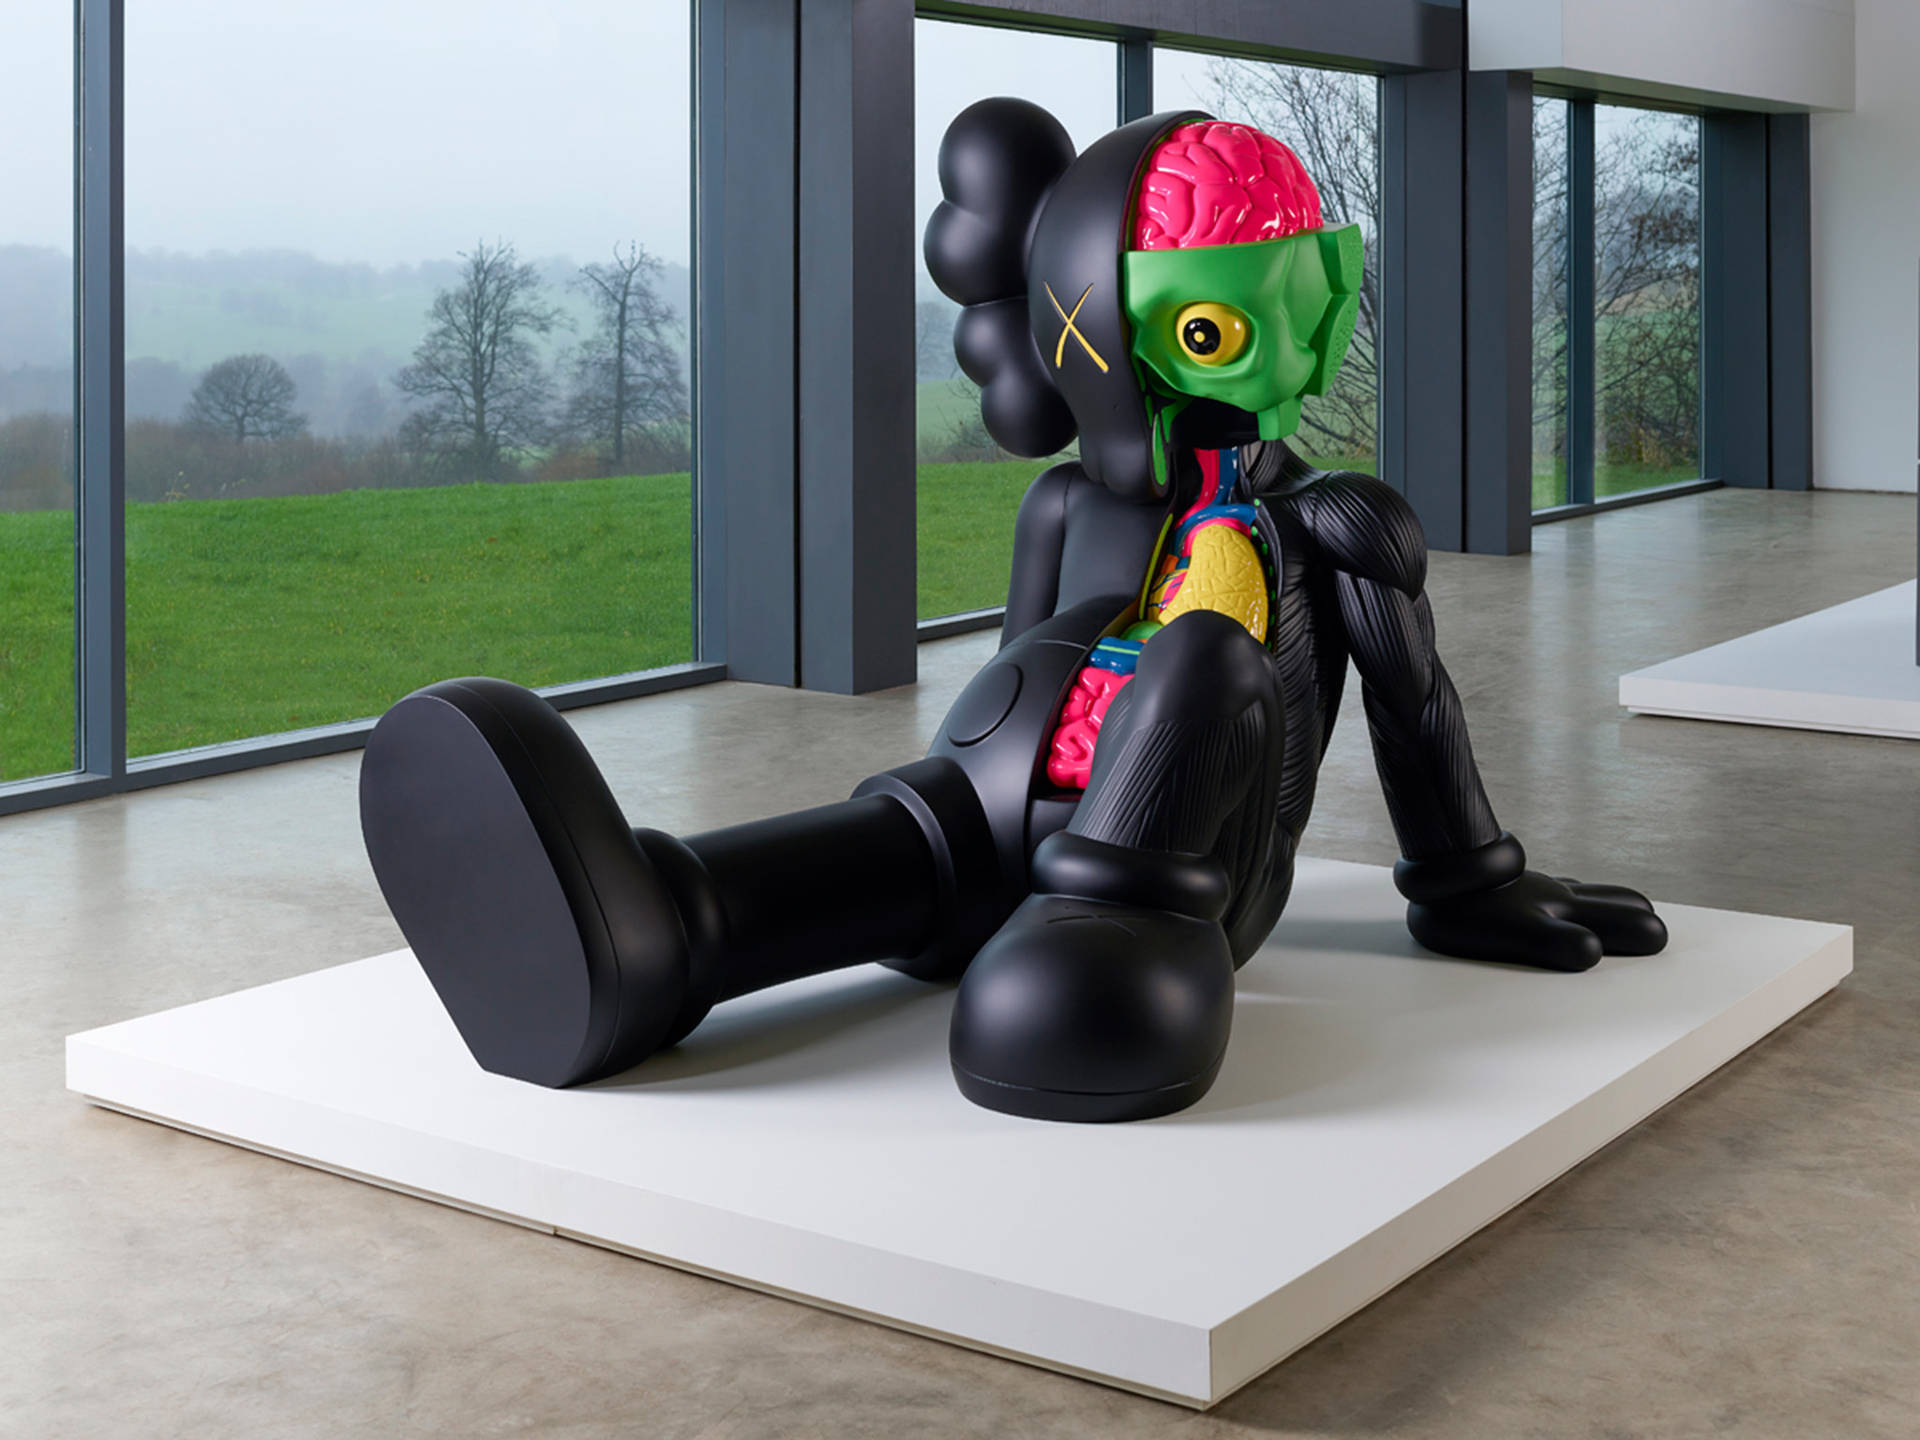 Kaws Dissected Sculpture Installation